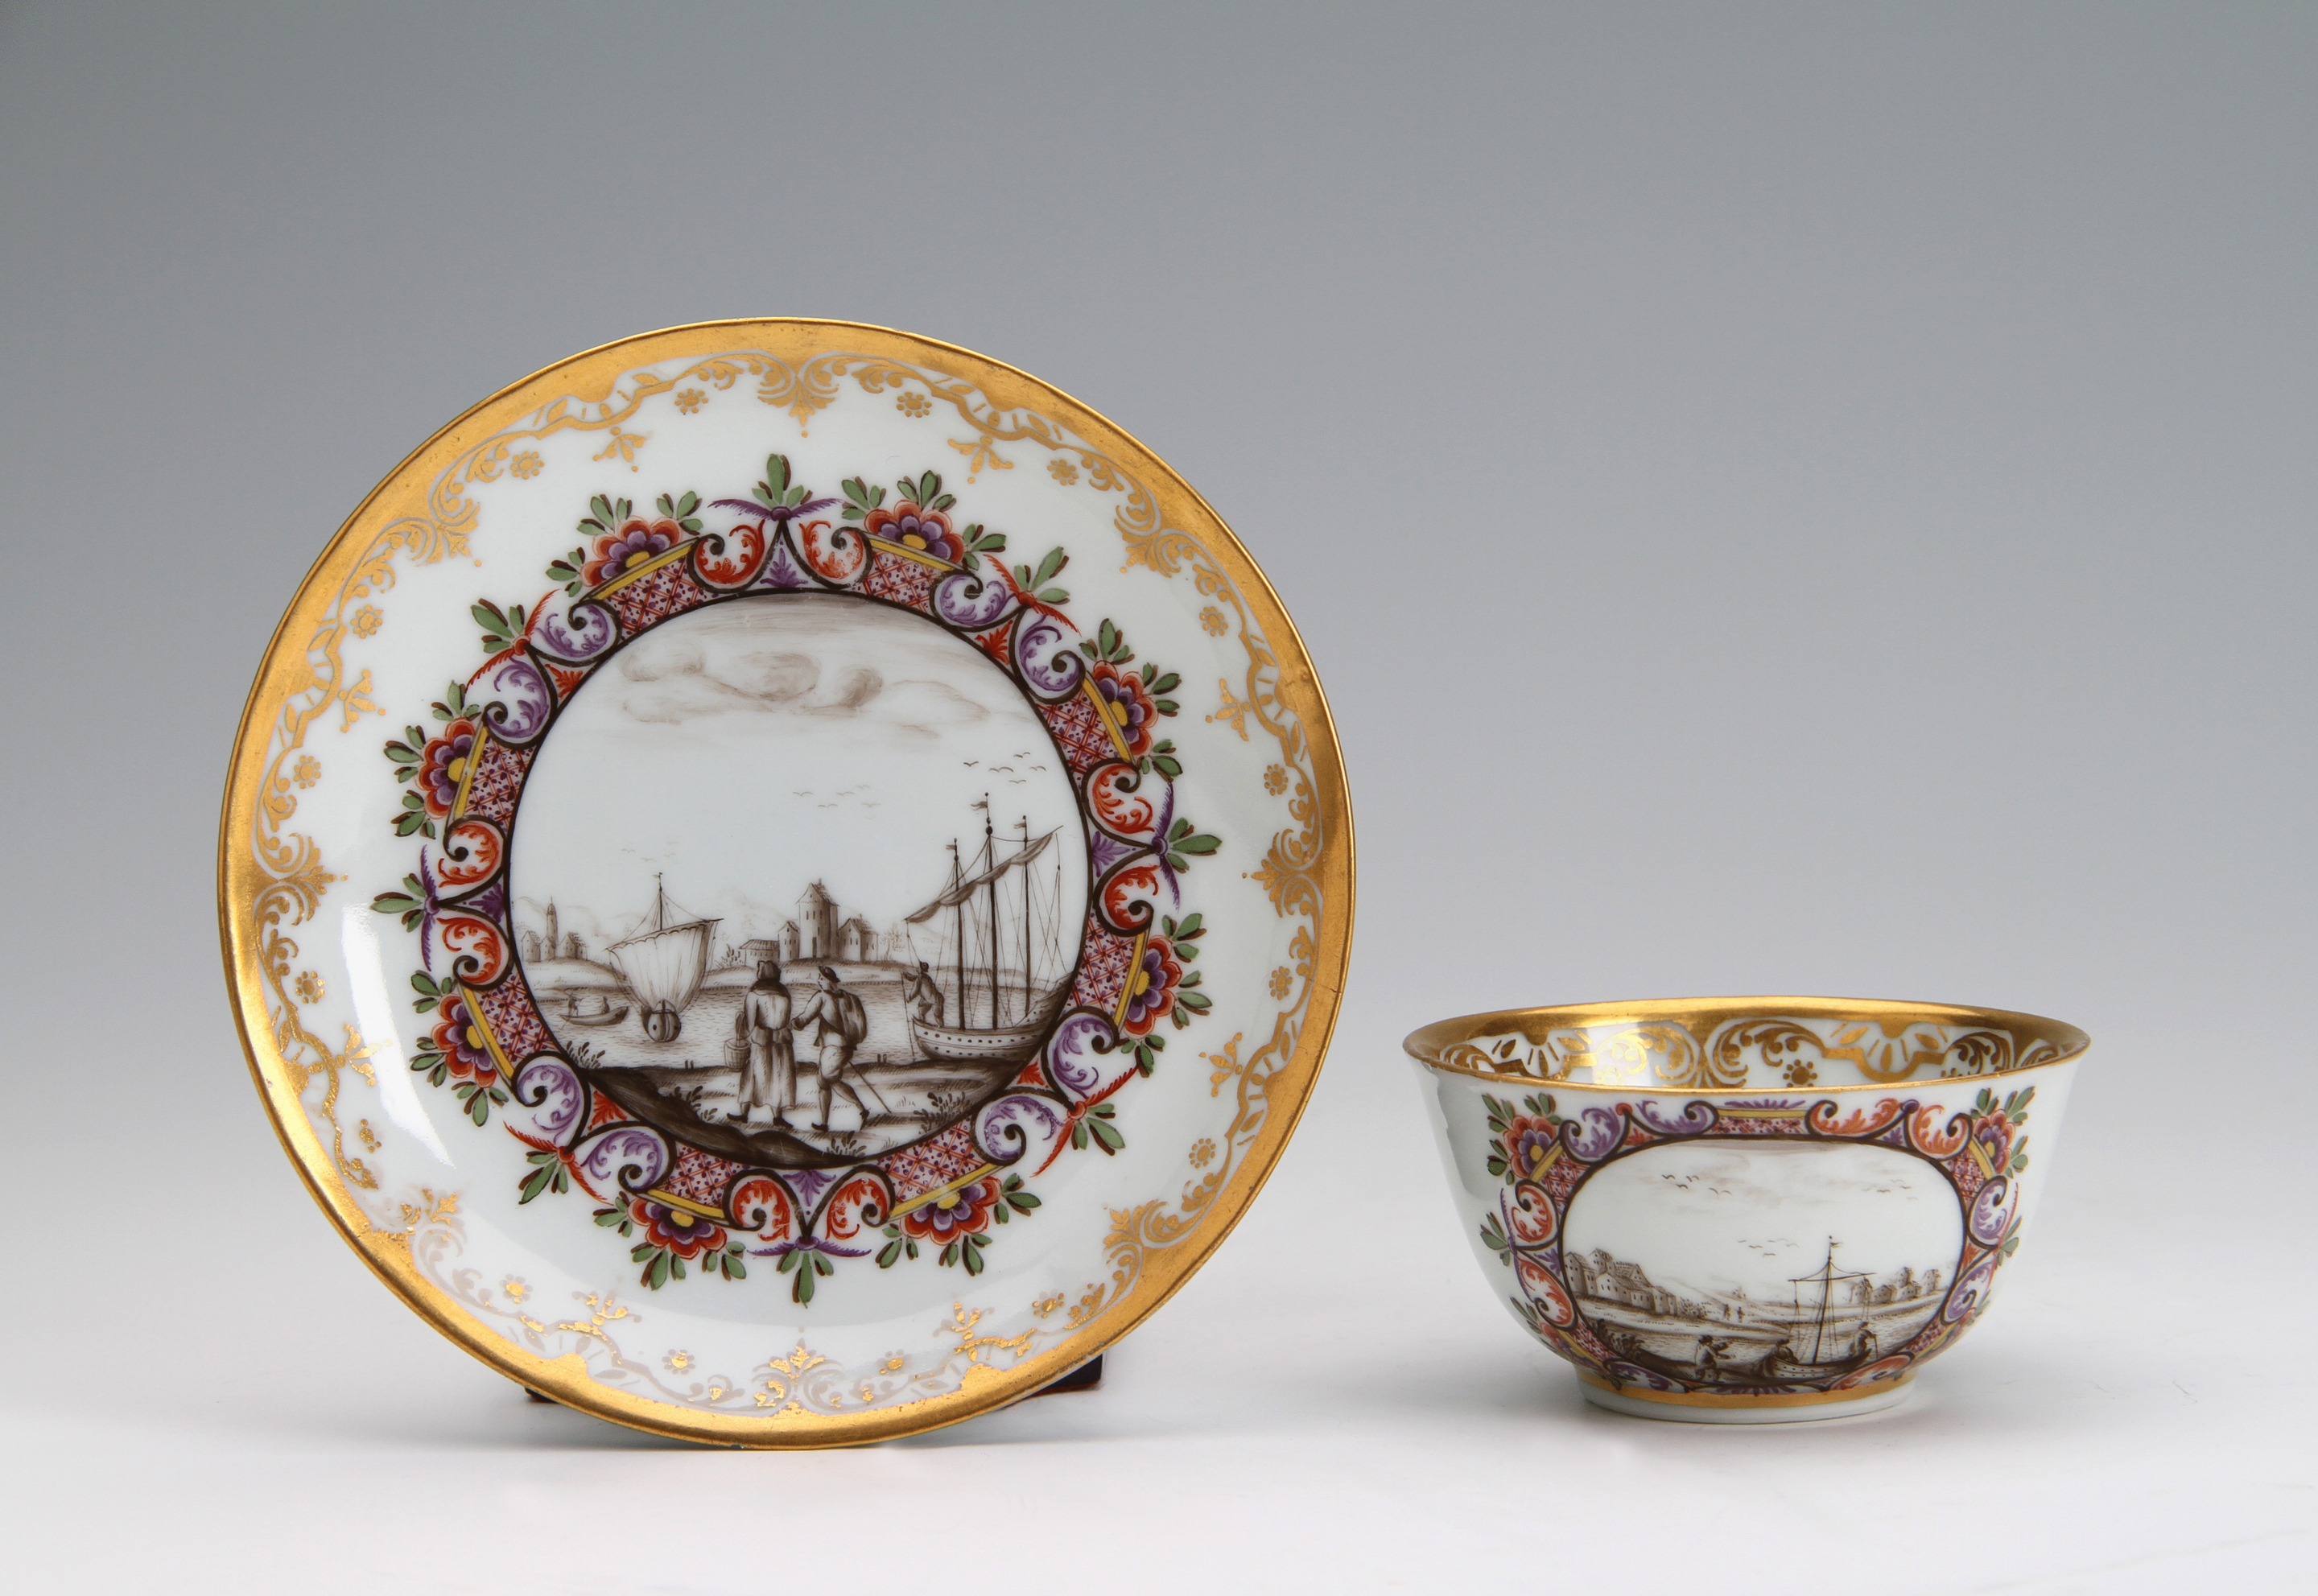 A Chinese porcelain teabowl and saucer decorated in the workshop of Johann Friedrich Metzsch